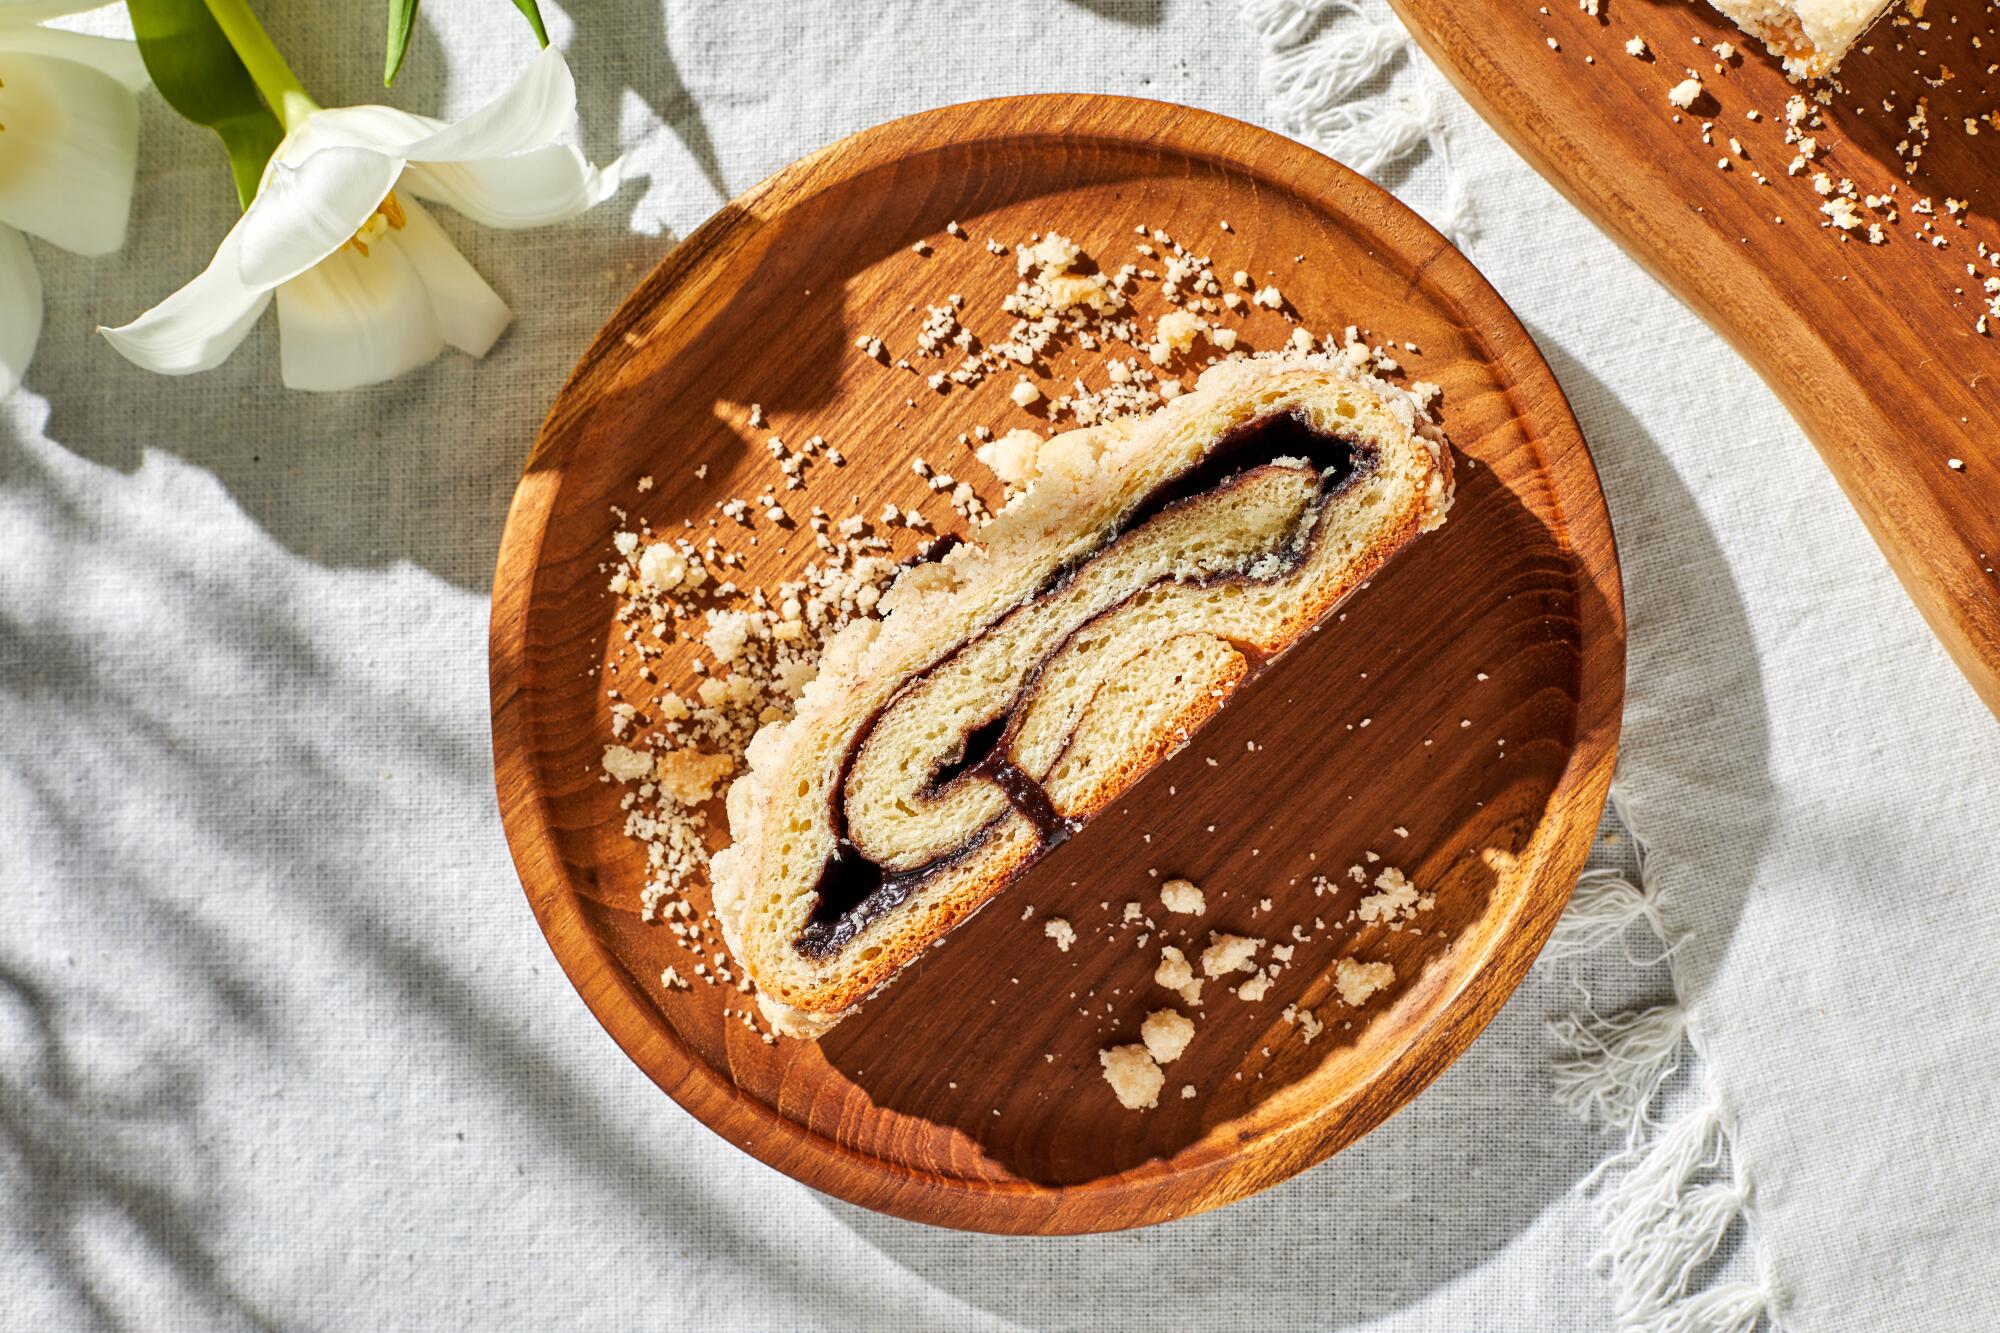 Kokosh cake is filled with a bittersweet filling and topped with crunchy crumbs.